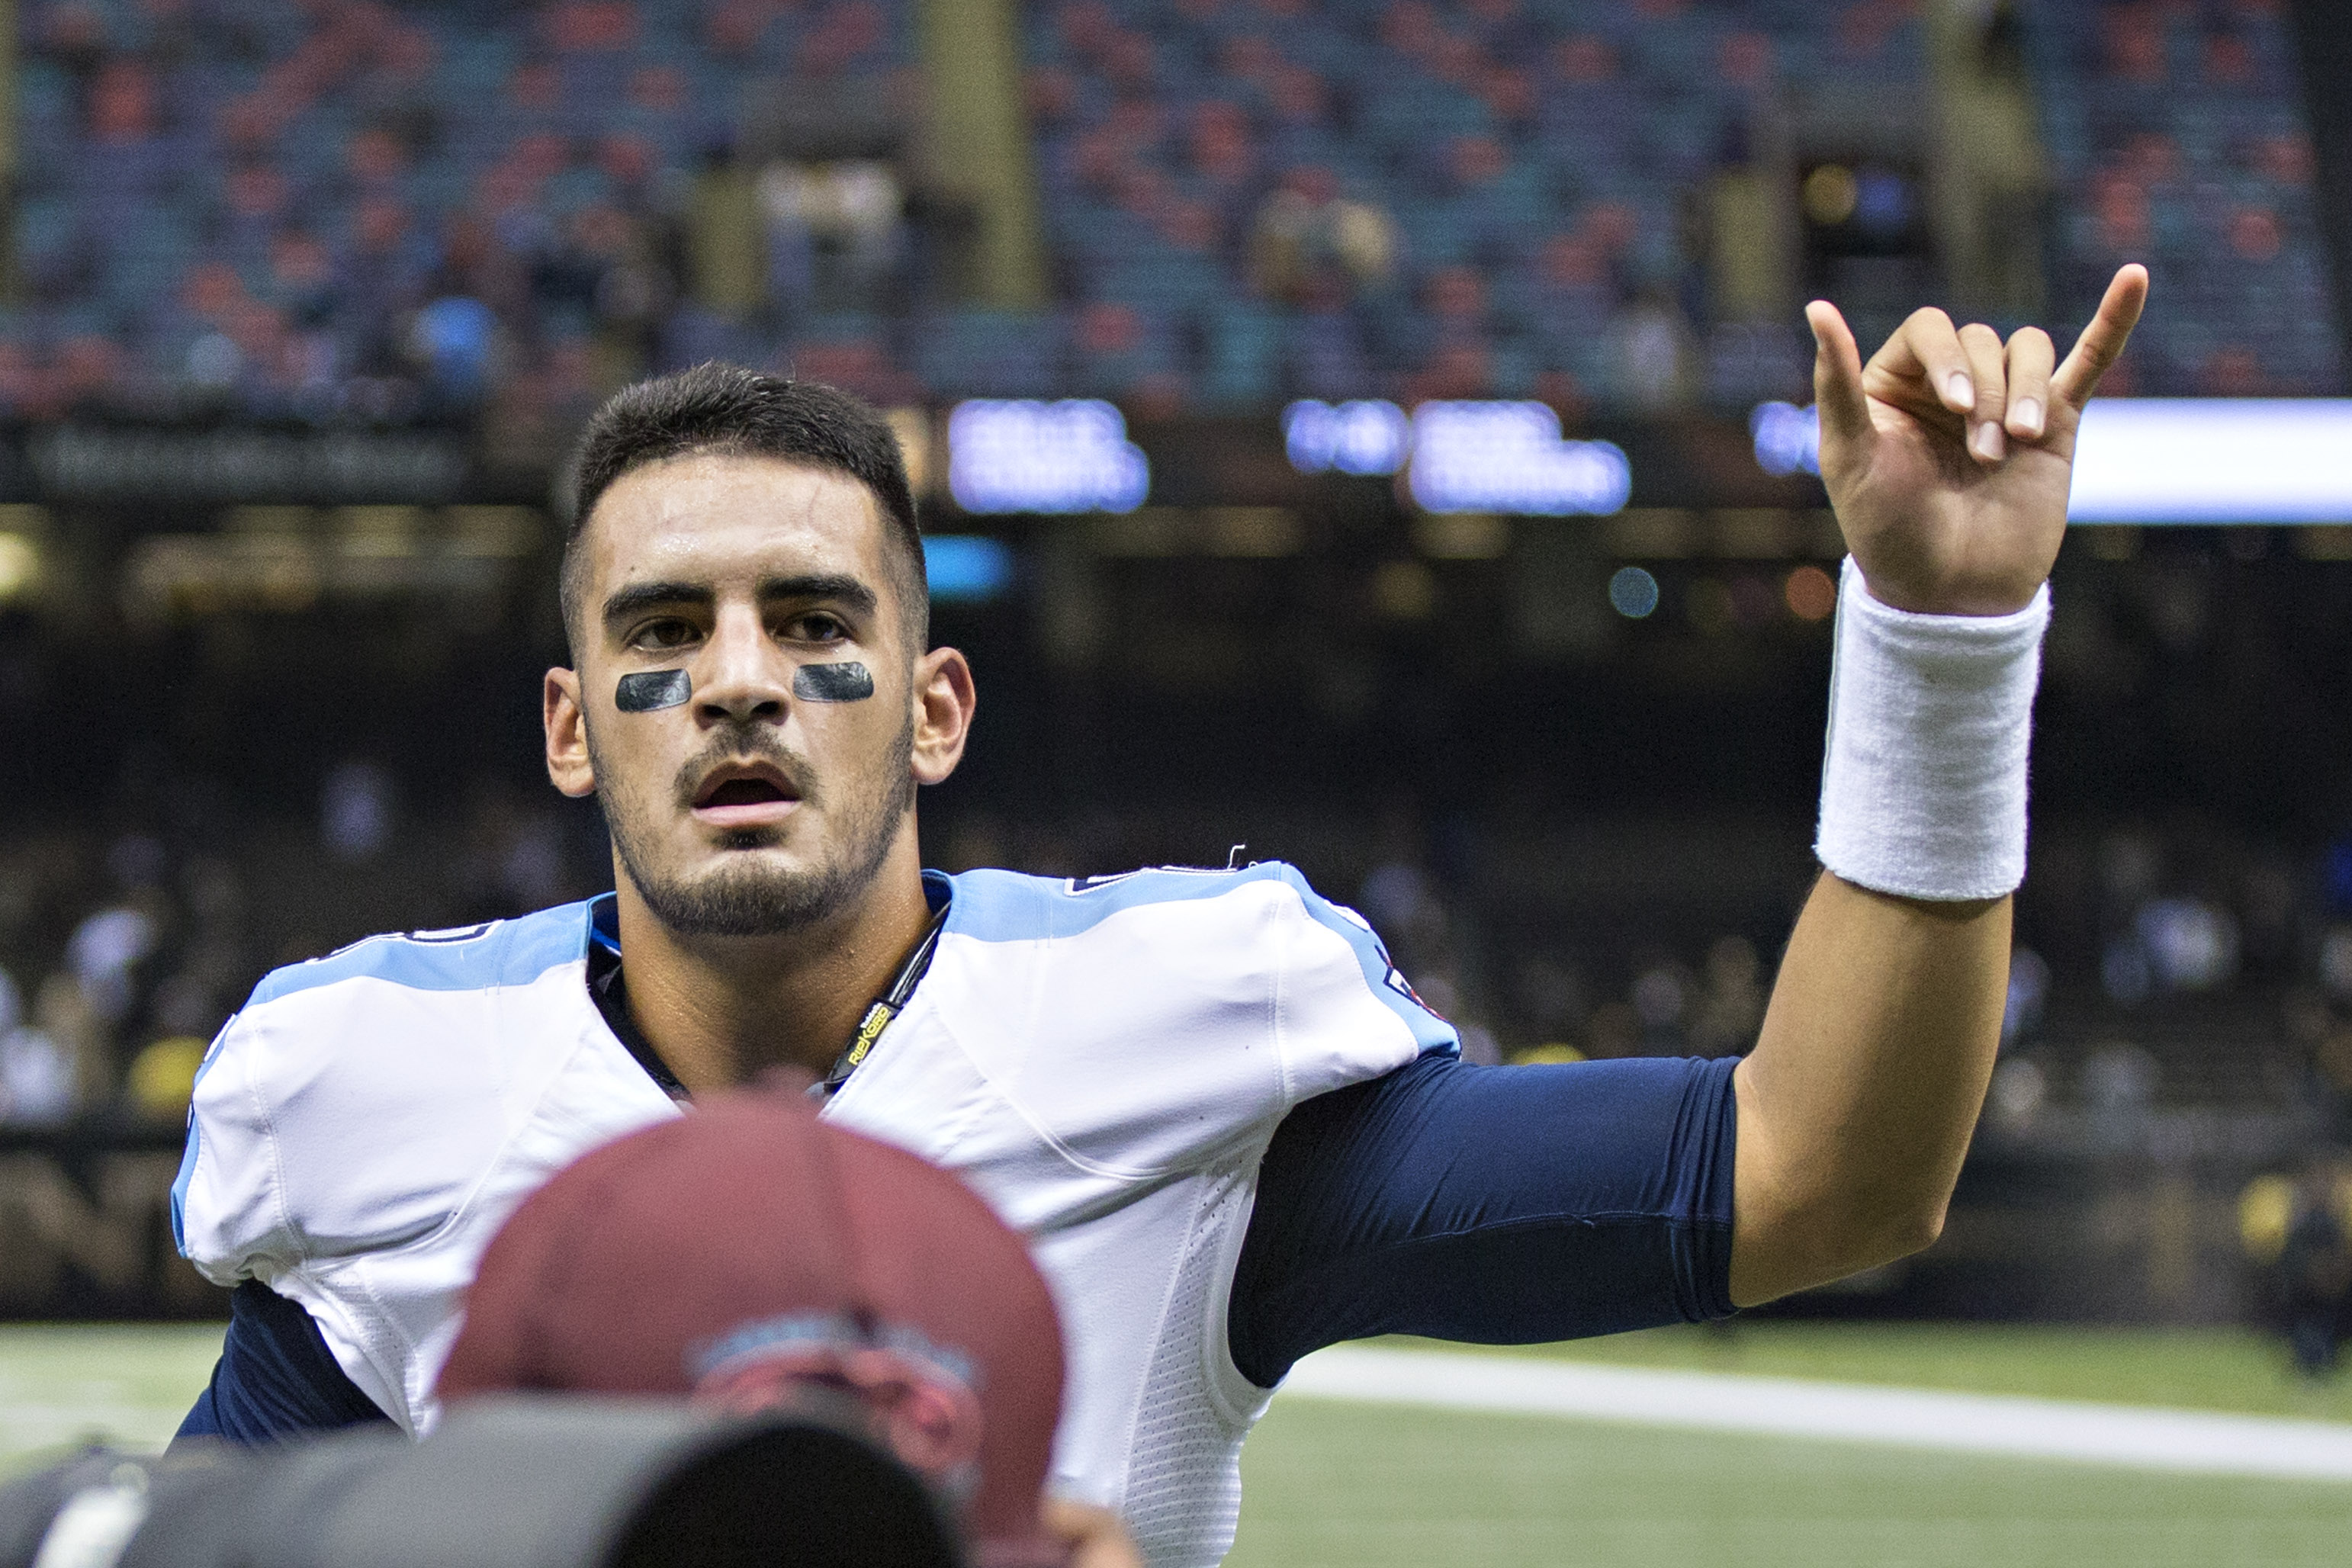 Hard work pays off: Mariota has shined as the Titans rookie QB. (Getty)